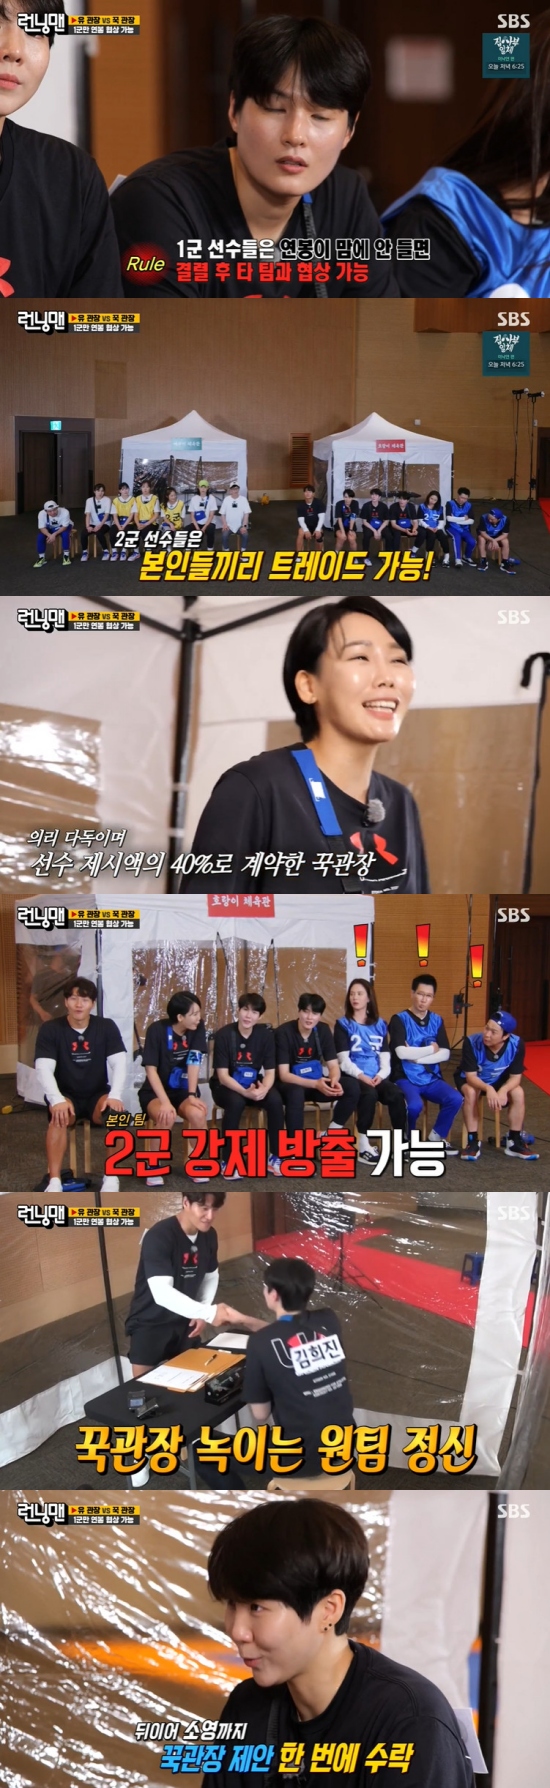 On SBS Running Man broadcasted on the 3rd, Yoo Jae-Suk and Kim Jong-kook are performing the salary Movie - The Negotiation while being decorated with Yoo Jang-jang vsuk director race.The day was followed by the team Yoo Jae-Suk (Yoo Jae-suk, Kim Yeon-koung, Yeum Hye-Seon, Park Eun-jin, Ahn Hye-jin, Jeon So-min, Yang Se-chan) and Kim Jong-kook (Kim Jong-kook, Kim Hee-jin, Oh Ji-young, Lee So-young, Ji Suk-jin, Haha, and Song Ji-hyo) were divided into 1st and 2nd groups and played a footwear match.Kim Jong-kook team consisted of first group Oh Ji-young, Lee So-young, Haha and second group Kim Hee-jin, Ji Suk-jin and Song Ji-hyo. The Yoo Jae-Suk team consisted of first group Kim Yeon-koung, Yeum Hye-Seon, Yang Se-chan and second group Park Eun-jin, Ahn Hy It was decided to be e-jin, Jeon So-min.Kim Jong-kook and Yoo Jae-Suk teams were captained by Oh Ji-young and Jeon So-min, respectively, and the managers participated in the first group Kyonggi.Kim Jong-kooks team beat the Yoo Jae-Suk team 11–9 in Group 1 Kyonggi, while the Yoo Jae-Suk team won Group 2 Kyonggi 11–9.Kim Jong-kooks team won the final with a bonus because of the victory of the first-team match.Kim Jong-kooks team won 400,000 One and Yoo Jae-Suks team won 200,000 One.The production team also said they would start the annual salary Movie - The Negotiation, and asked them to pick first-team players.Yoo Jae-Suk chose Yeum Hye-Seon, Kim Yeon-koung, Yang Se-chan, while Kim Jong-kook chose Lee So-young, Oh Ji-young and Kim Hee-jin.The production team said, If the players do not like the salary of Jessie, they can go to the other manager and move Movie - The Negotiation.Players had to remain forced to half the initial Jessie amount if both were broken down at the time of Movie - The Negotiation.The second group was able to trade among the players, and the managers were able to trade one by one.Kim Jong-kook and Yoo Jae-Suk hosted the annual salary Movie - The Negotiation at different venues.Kim Jong-kook team leader Oh Ji-yeong Jessieeed 500,000 One, and Kim Jong-kook said he would give 200,000 One.Oh Ji-yeong finally decided to stay at 200,000 One.Yoo Jae-Suk team Yang Se-chan readily responded to Movie - The Negotiation for 30,000 One.However, Yang Se-chan was mistaken for Movie - The Negotiation with 200,000 One in the footwear prize money, not the cumulative amount, and he was frustrated and laughed.Kim Hee-jin said, I will receive 170,000 One, so please raise only one in the second group. Kim Jong-kook accepted it happily.Lee So-young also received 170,000 Ones.In particular, Yoo Jae-Suk cut Yeum Hye-Seons salary from 140,000 to 120,000 One.In the meantime, Kim Yeon-koung found that Yoo Jae-Suk gives a low salary compared to Kim Jong-kook team.Kim Yeon-koungs salary Movie - The Negotiation turn, and Kim Yeon-koung said, You have to give it well.You have to give me the first Jessie amount, and I know how I treat you outside. Kim Yeon-koung said the desired salary was 300,000 One, and lied, saying, They said they received 300,000 One.Yoo Jae-Suk noticed Kim Yeon-koungs lies and blew a stone fastball, saying youre a miner.Kim Yeon-koung said, What strength can I do? I will do only 130,000 One. How can 130,000 One do it? Shouldnt I just stay still?I want to work hard. I want to be immersed in this.I will have a passion if you give me 300,000 One. After all, Movie - The Negotiation ended with 230,000 One.Photo = SBS broadcast screen